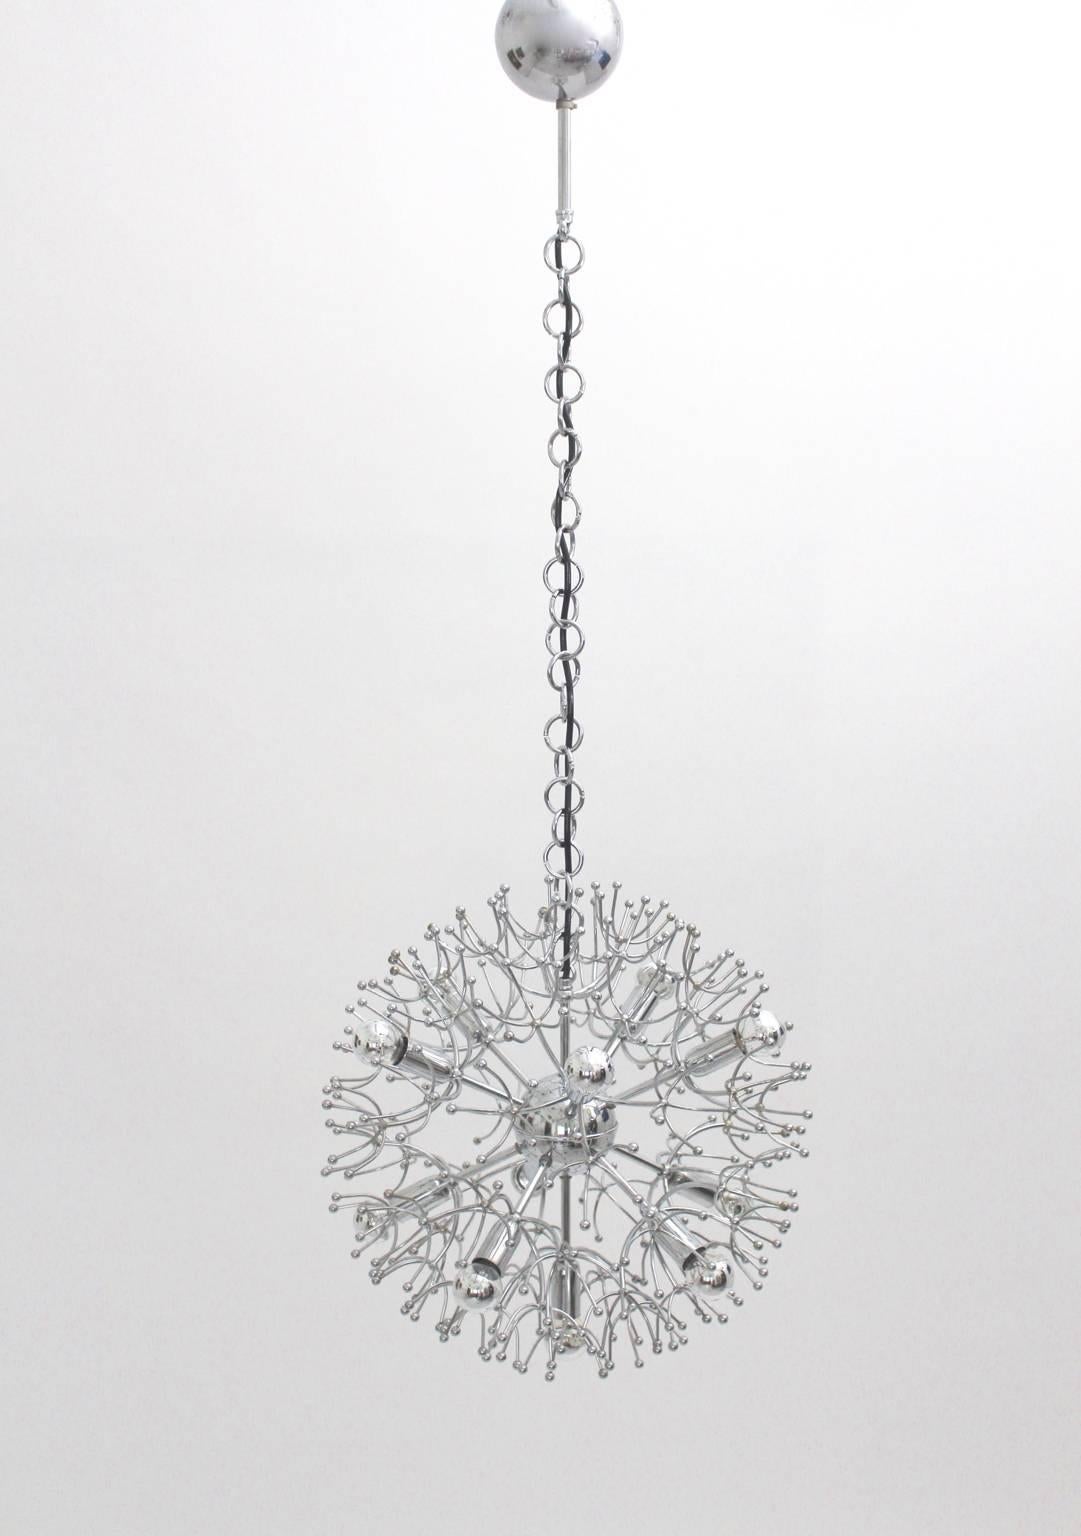 Space Age metal vintage chandelier or pendant from chromed metal by Gaetano Sciolari, Italy 1960s.
A fantastic chromium plated metal sputnik chandelier with 11 E 14 sockets , which is labeled with company´s name.
The sputnik chandelier shows good